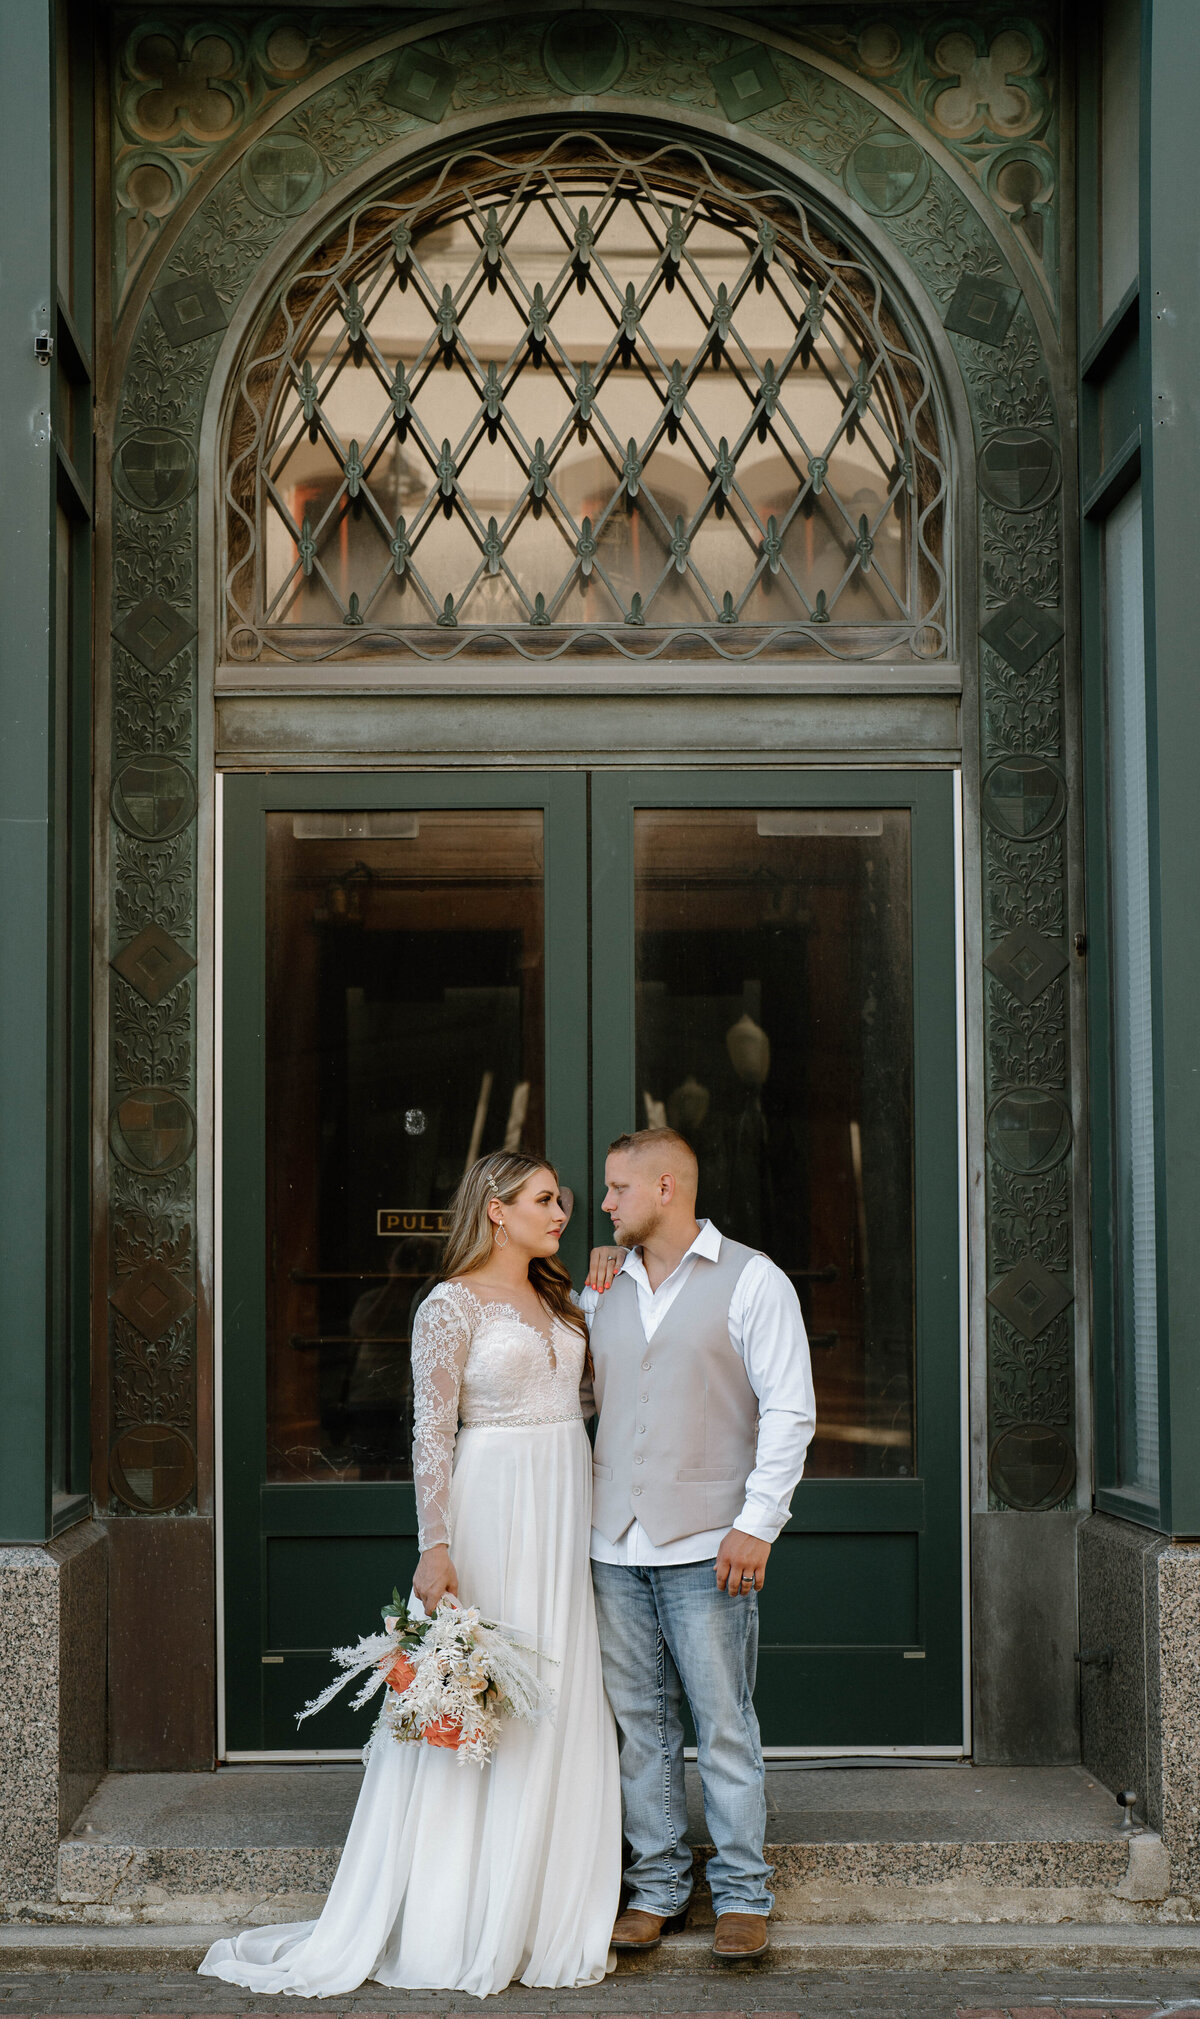 Downtown*beaumont_couples wedding Session-Courtney LaSalle Photography-17